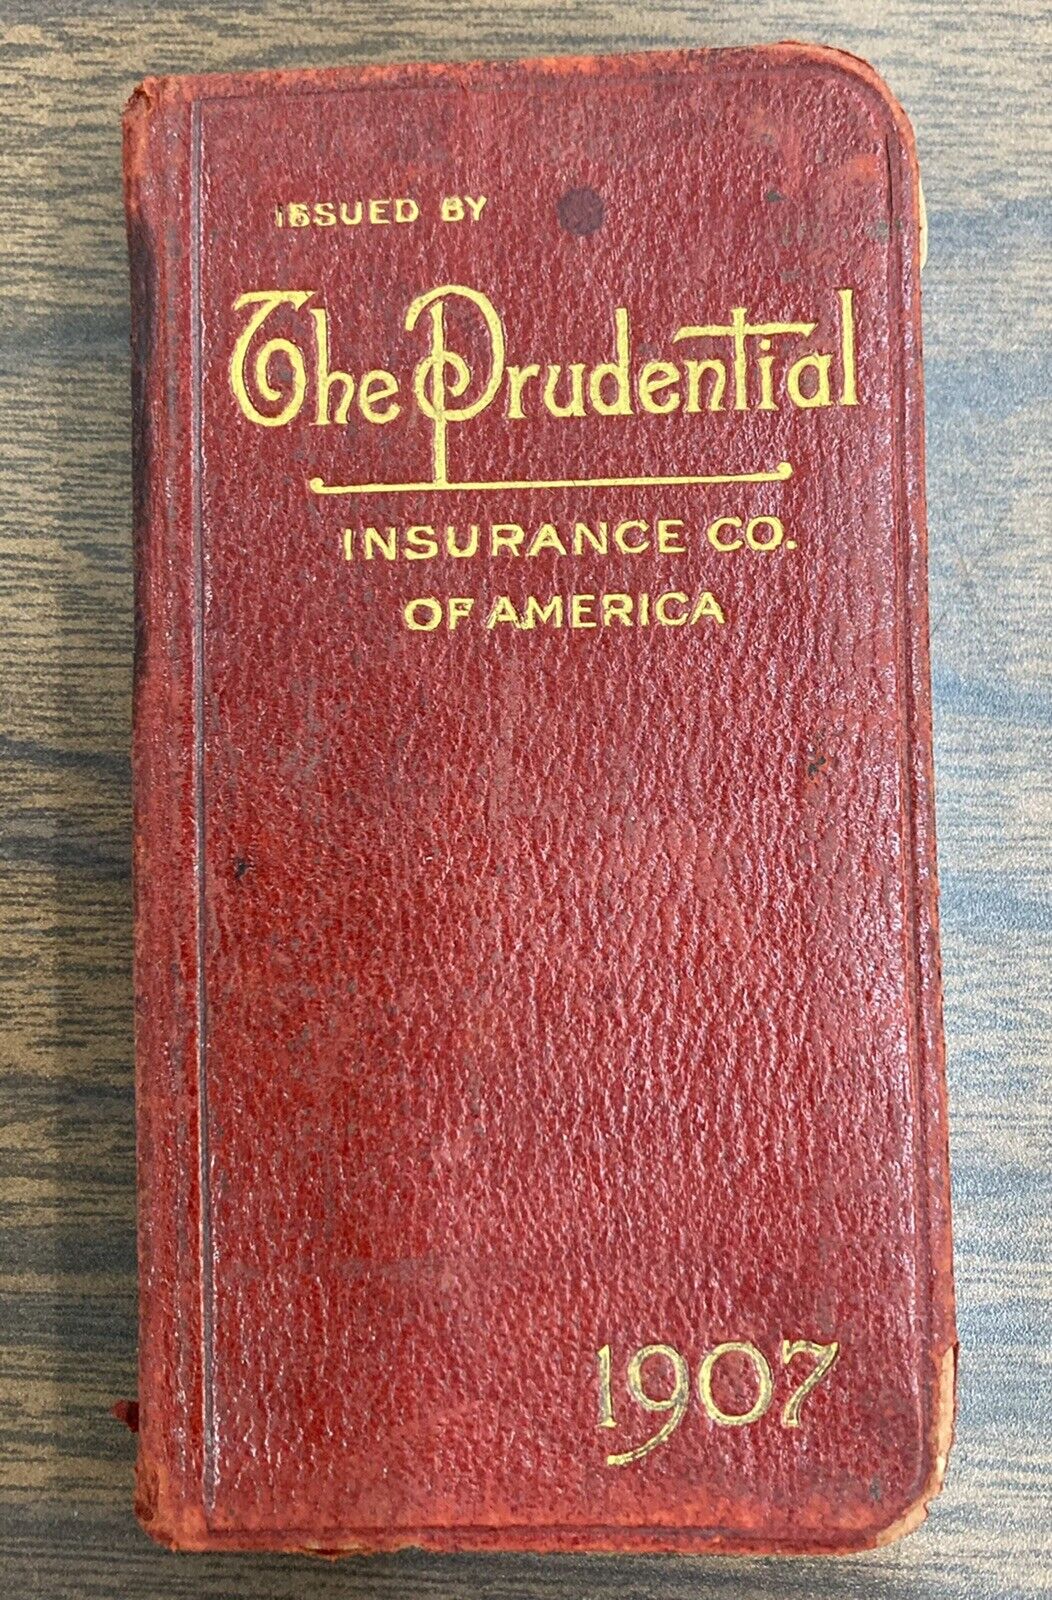 Vintage Prudential Insurance 1907 Pocket Diary